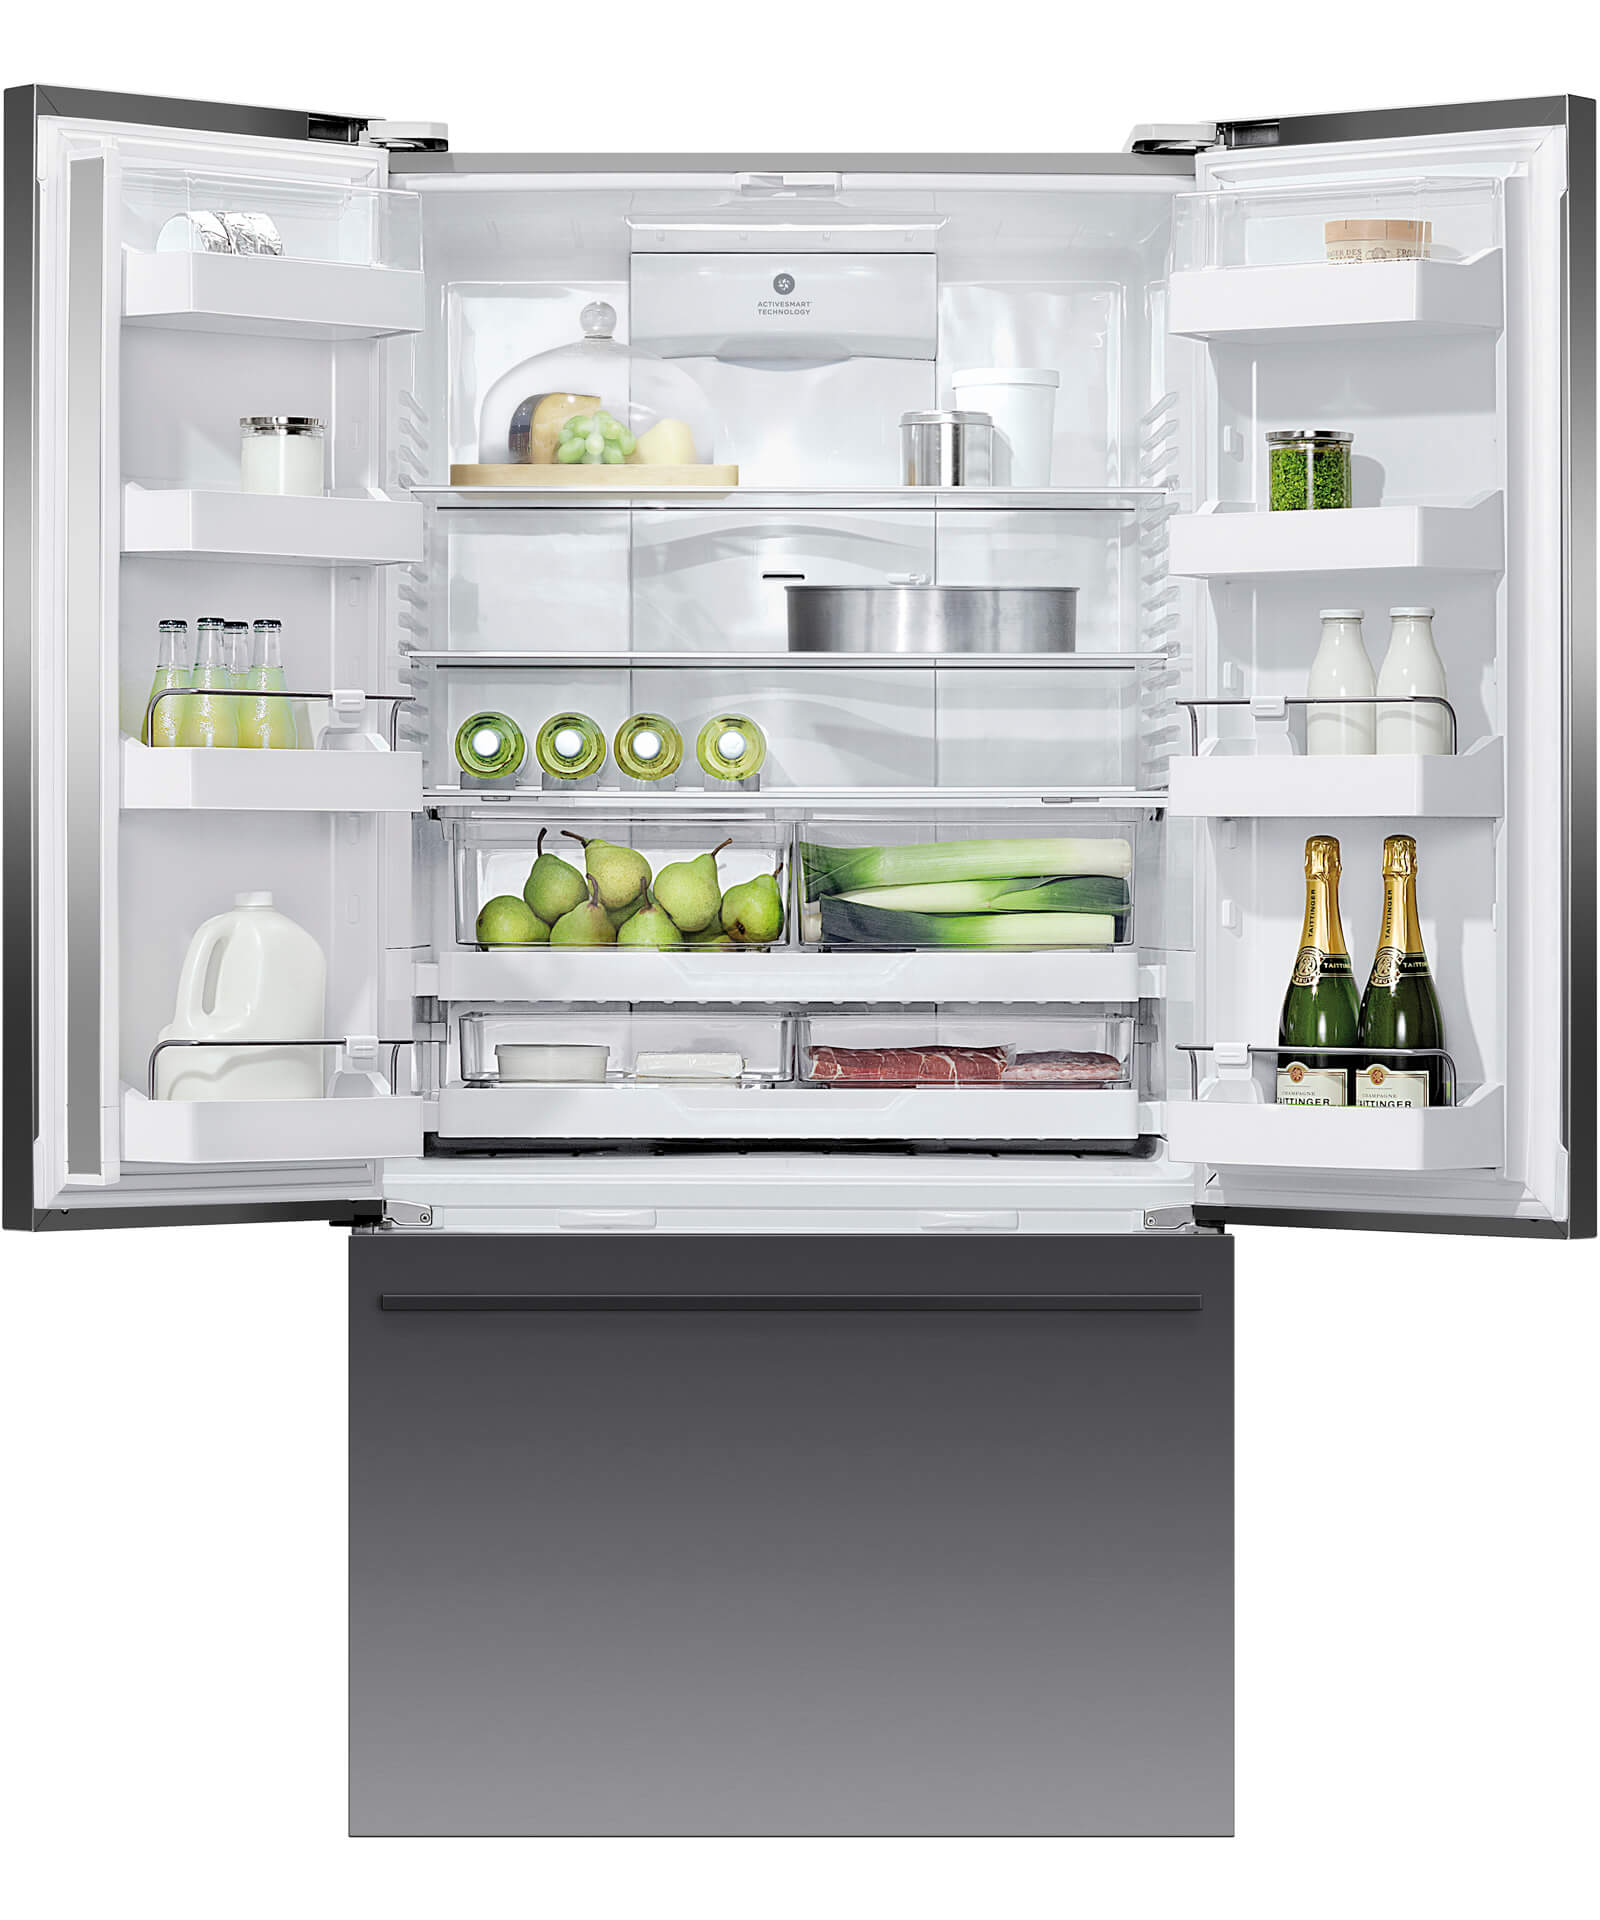 Fisher and paykel french door fridge manual